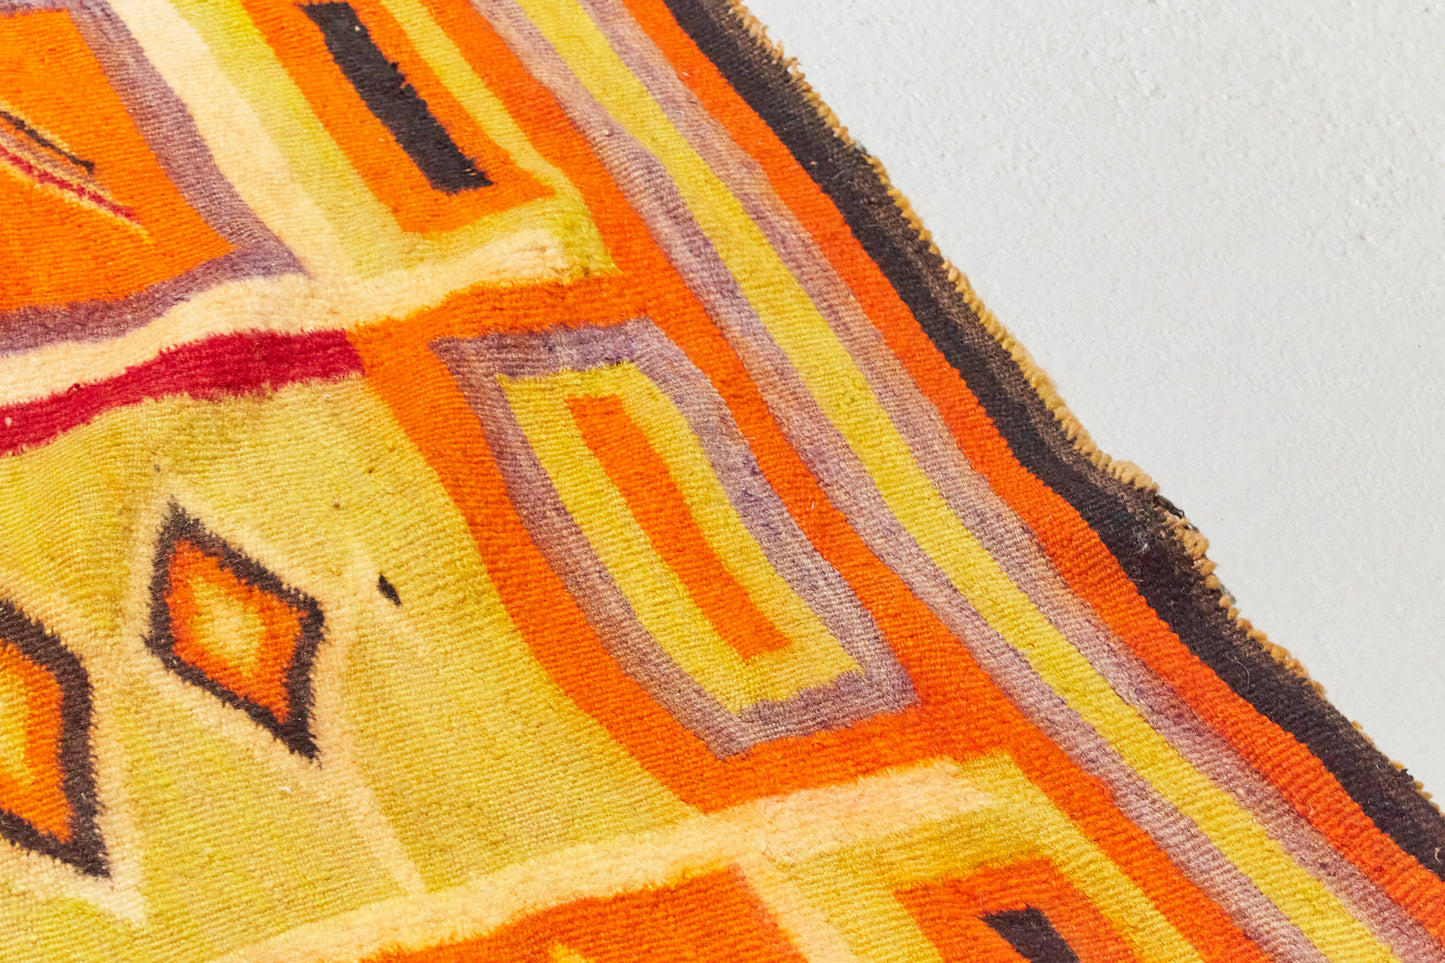 This Navajo Pound Blanket Transitional is a hand woven antique piece in vibrant red, orange and yellow natural dyes, with zig zags and diamonds throughout - Available from King Kennedy Rugs Los Angeles